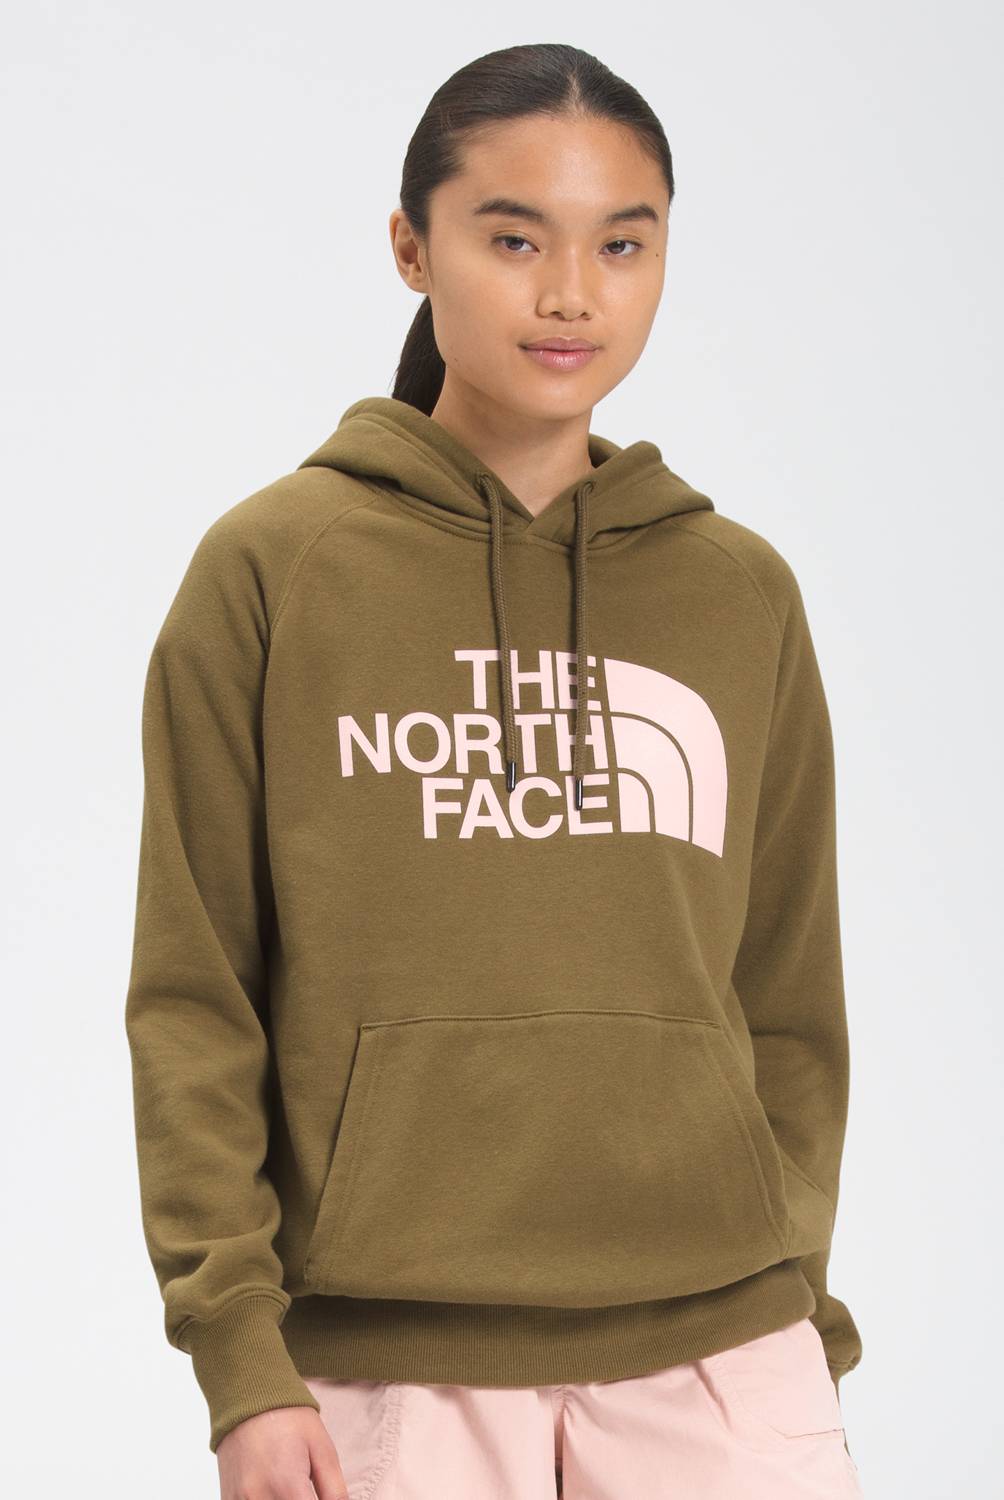 THE NORTH FACE - Polerón Outdoor Mujer The North Face